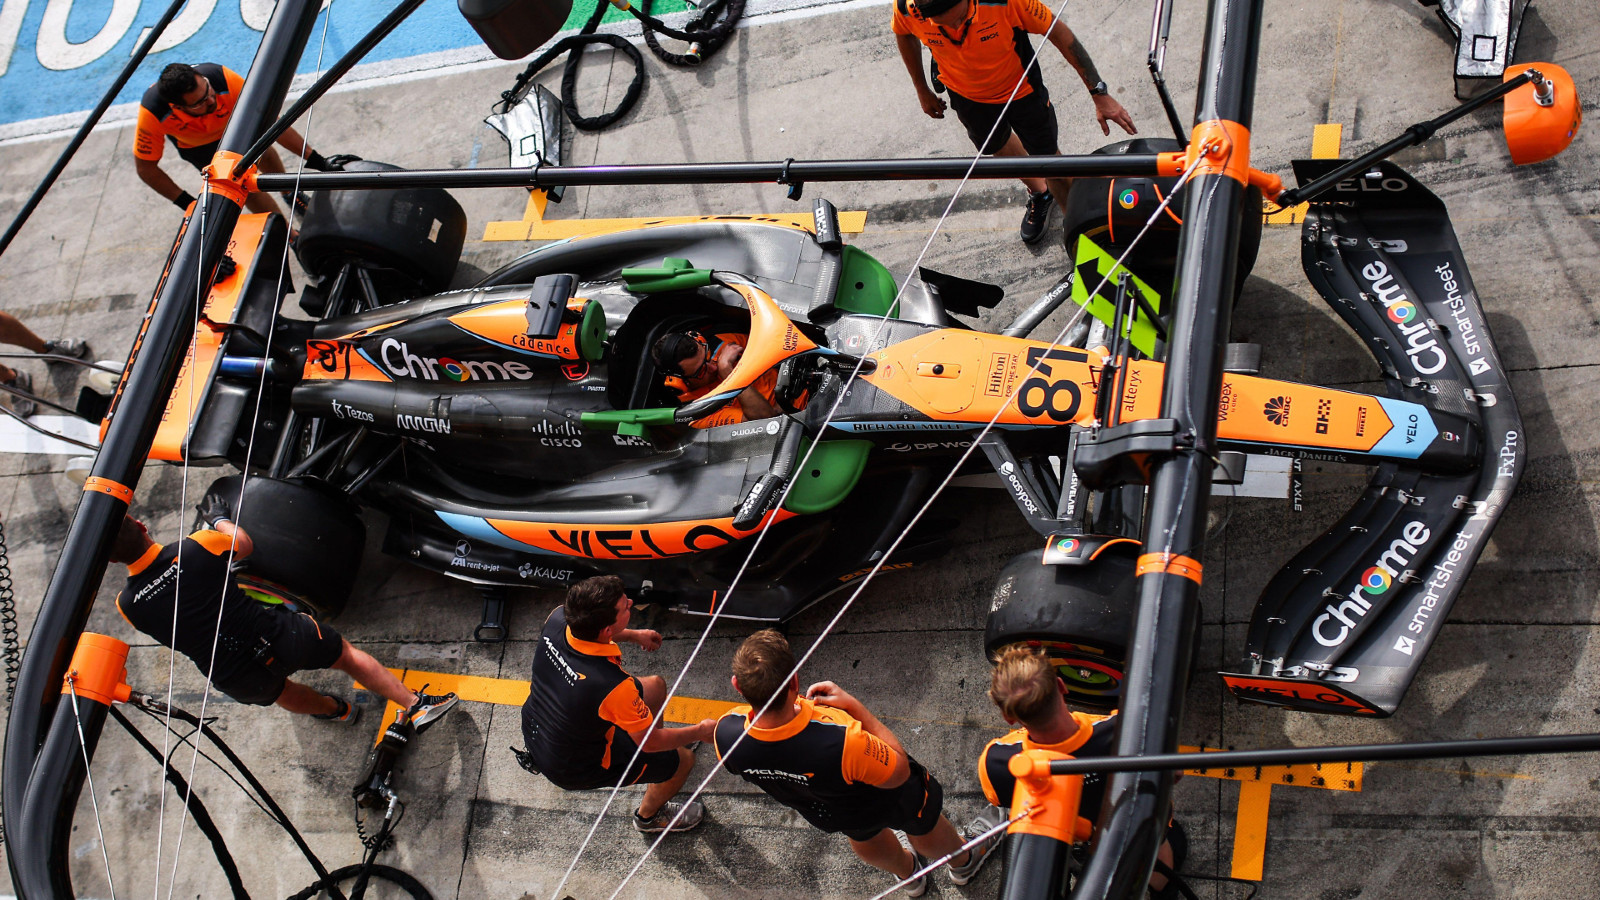 Oscar Piastri's car being worked on in the pits at Monza for the Italian Grand Prix.